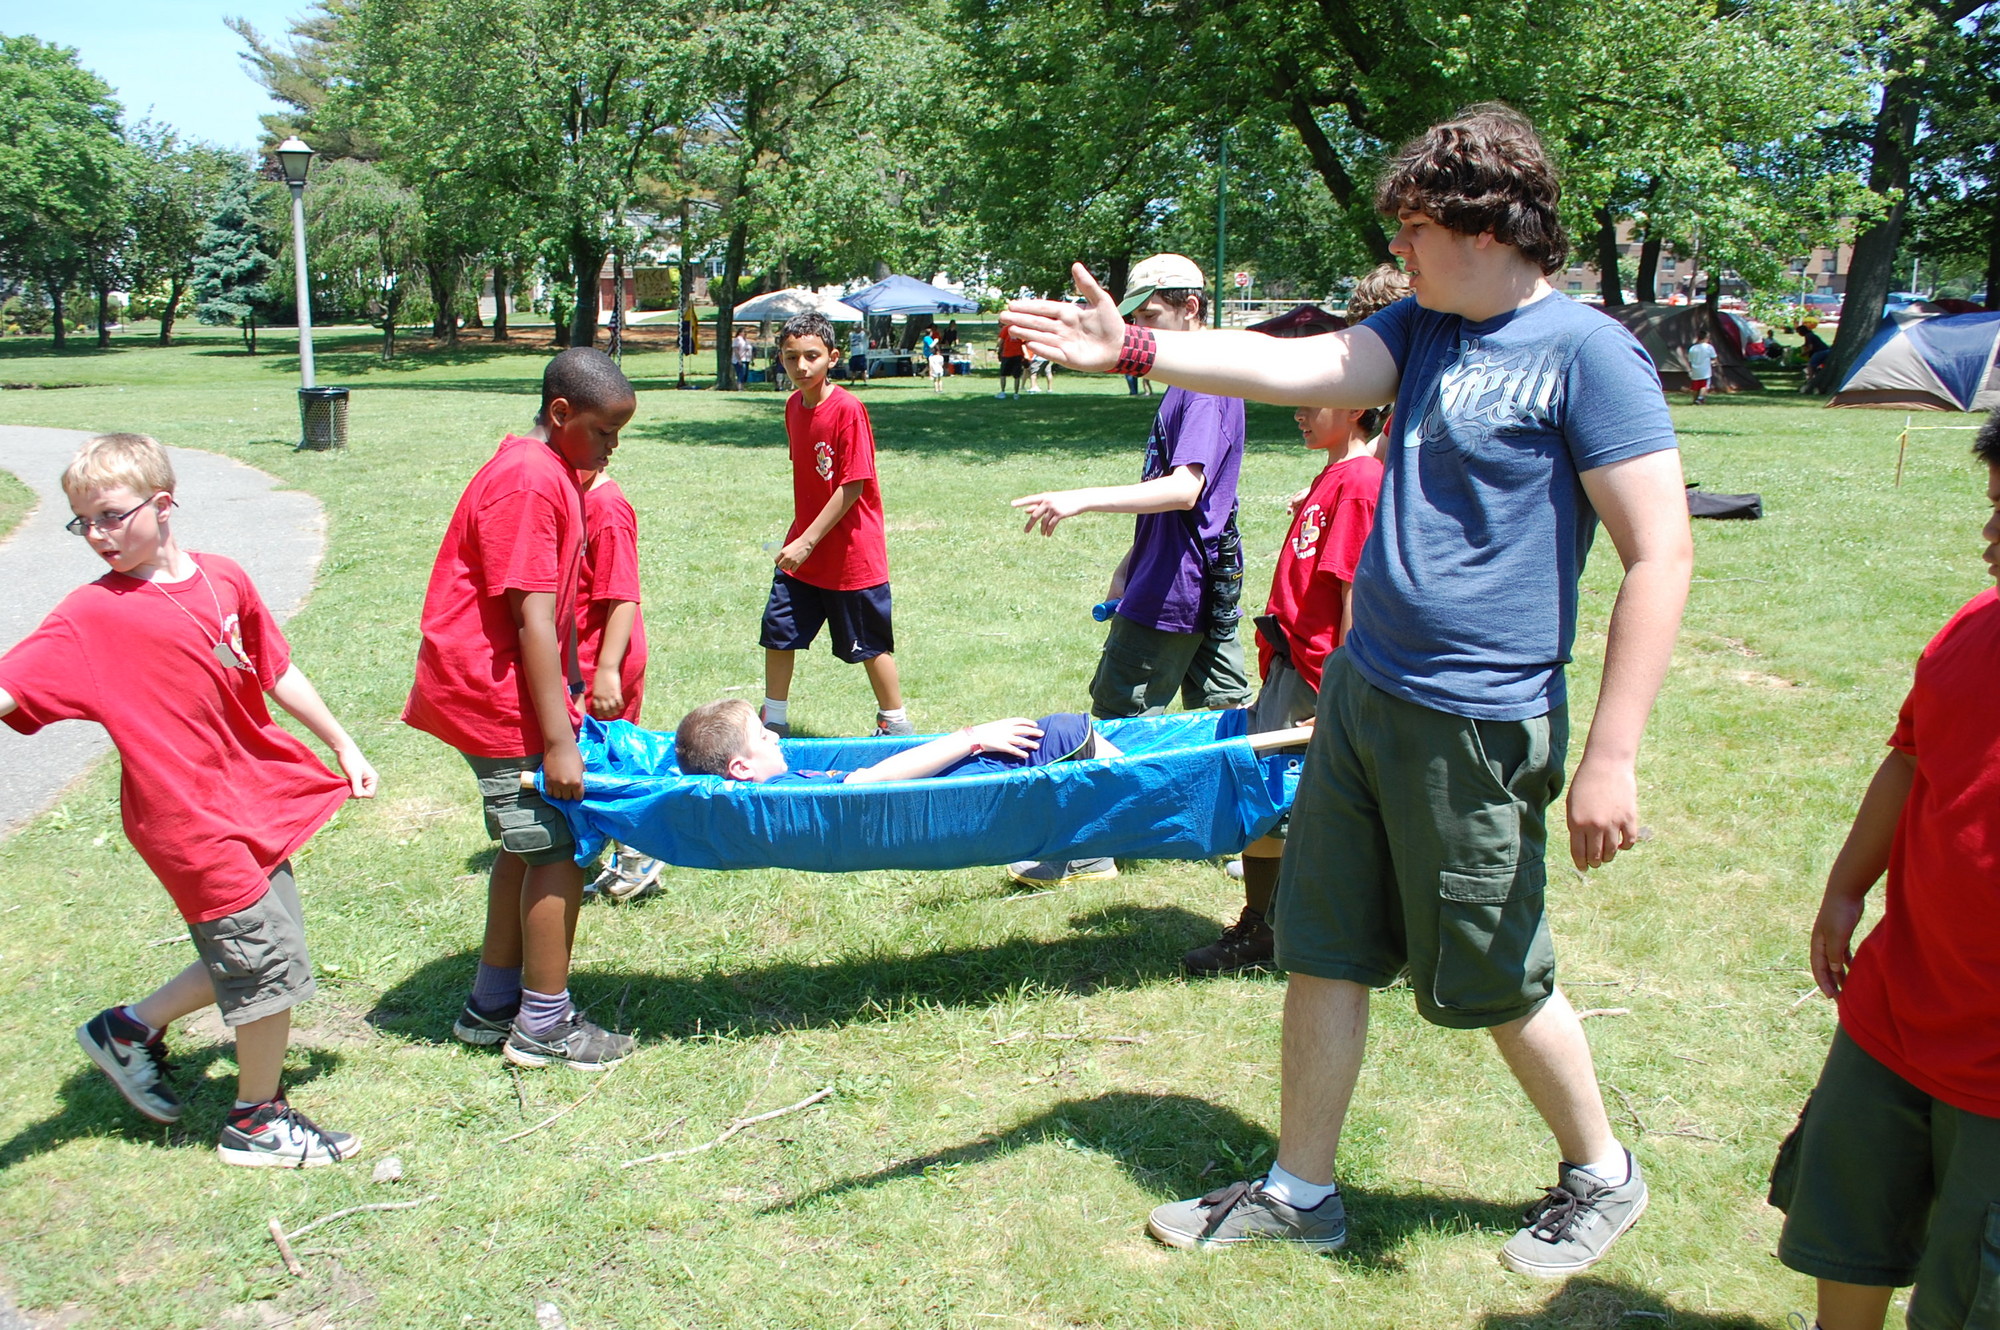 When a Cub Scout sprained his ankle, Boy Scouts from Troop 116 put their first aid skills to good use.